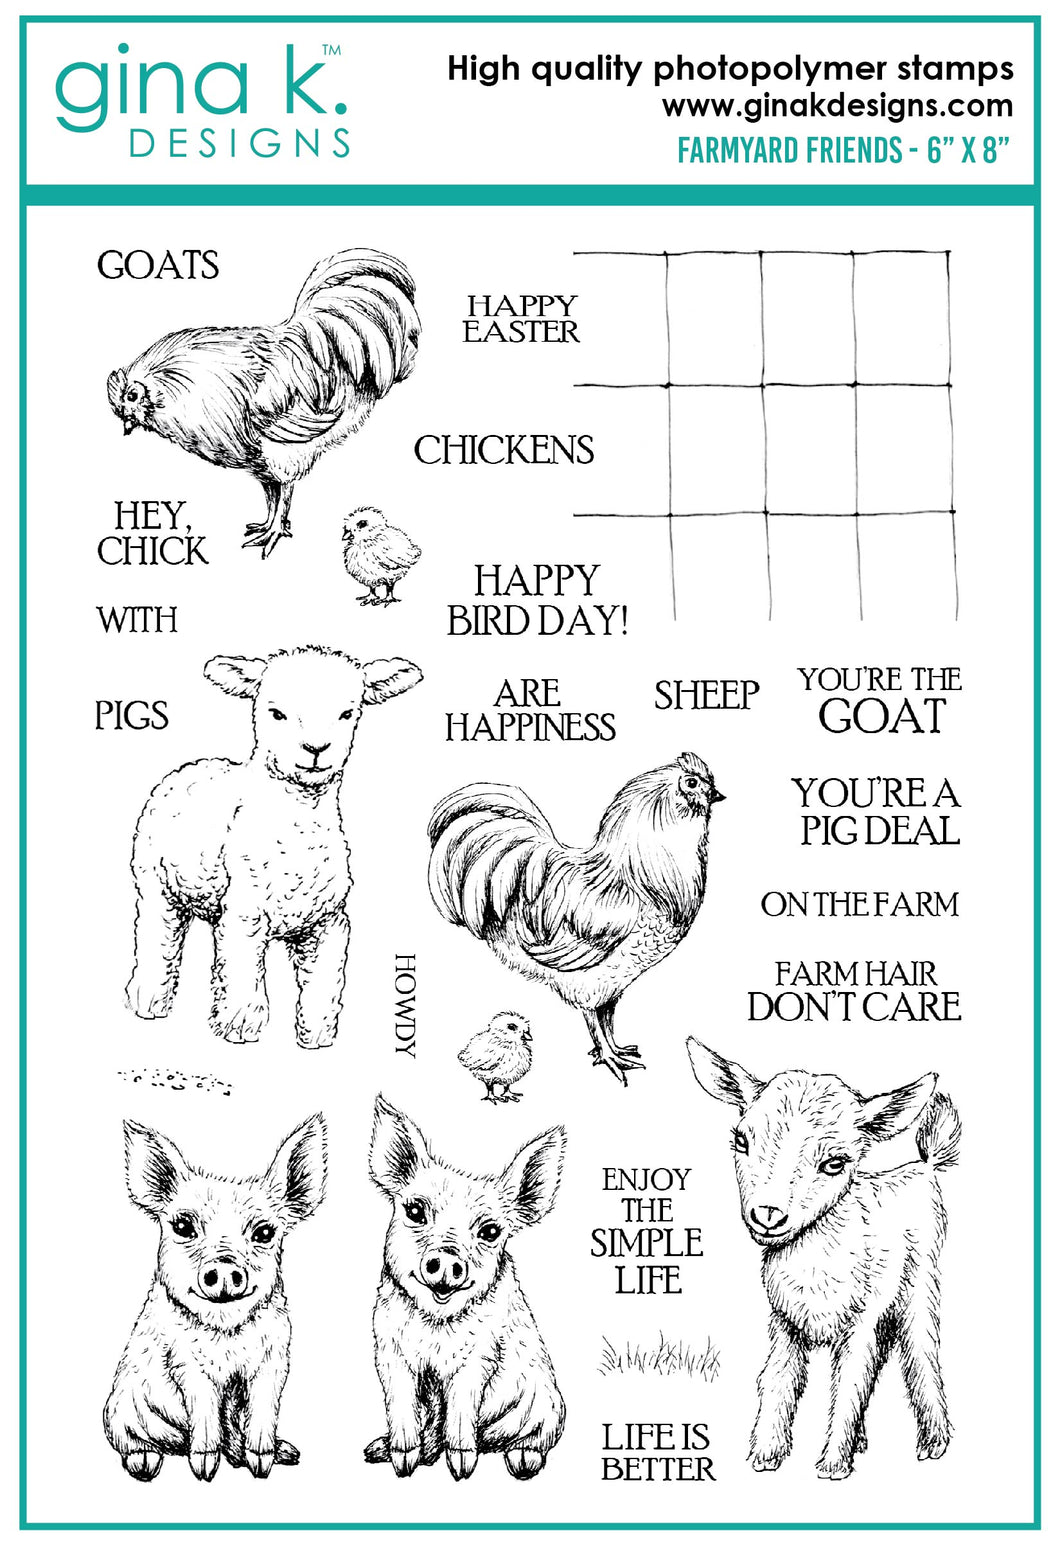 Gina K. Designs - Stamps - Farmyard Friends. Melanie Muenchinger’s realistic nature series continues with Farmyard Friends! You will love using these 8 farmyard animals plus scene building grass, dirt and wire fence images. Available at Embellish Away located in Bowmanville Ontario Canada.